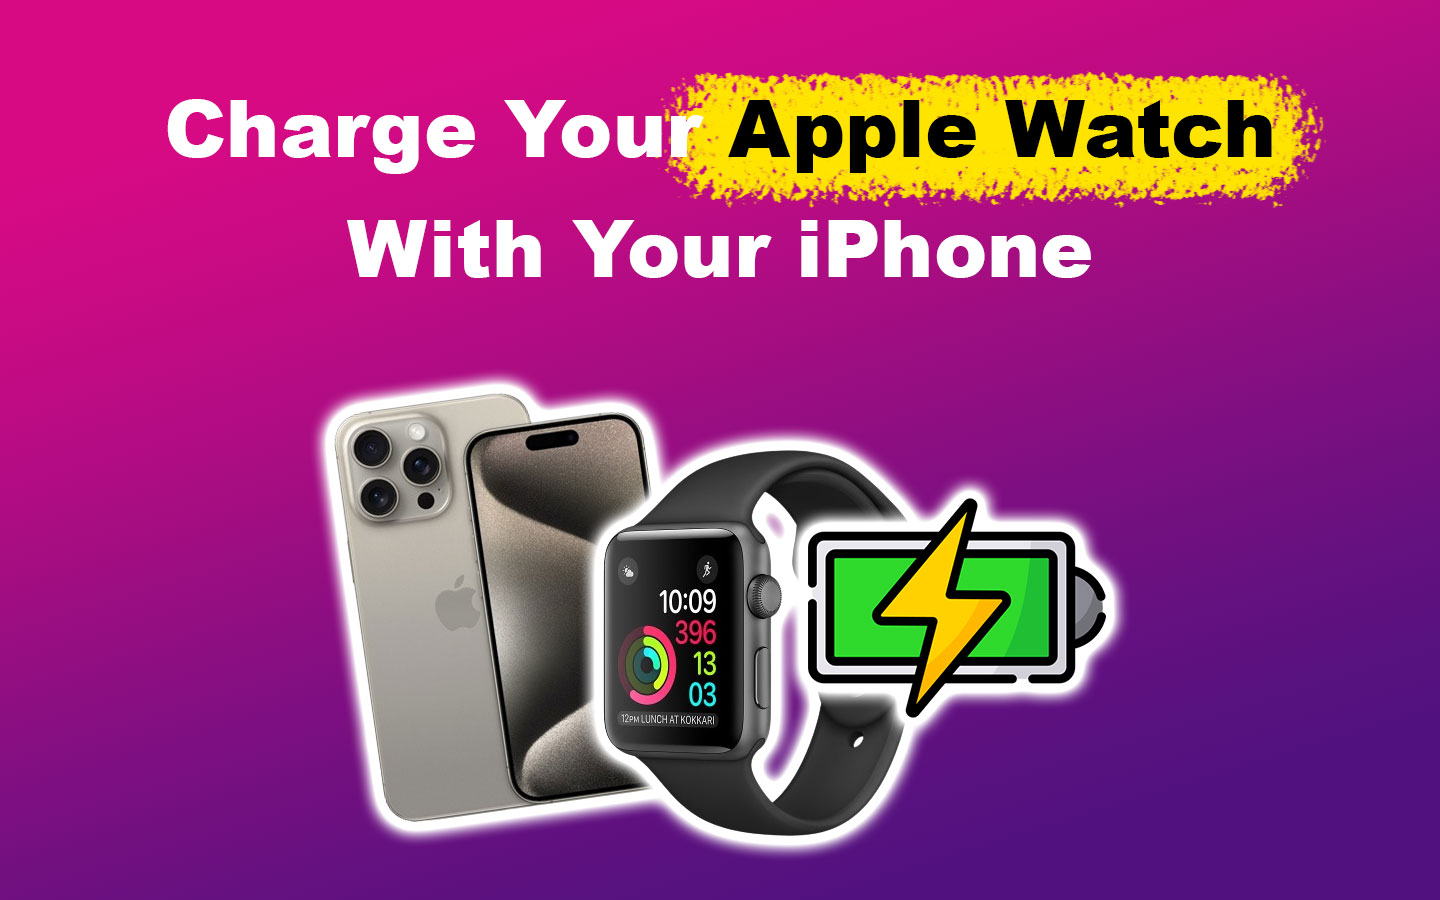 Can You Charge My Apple Watch With Your iPhone?